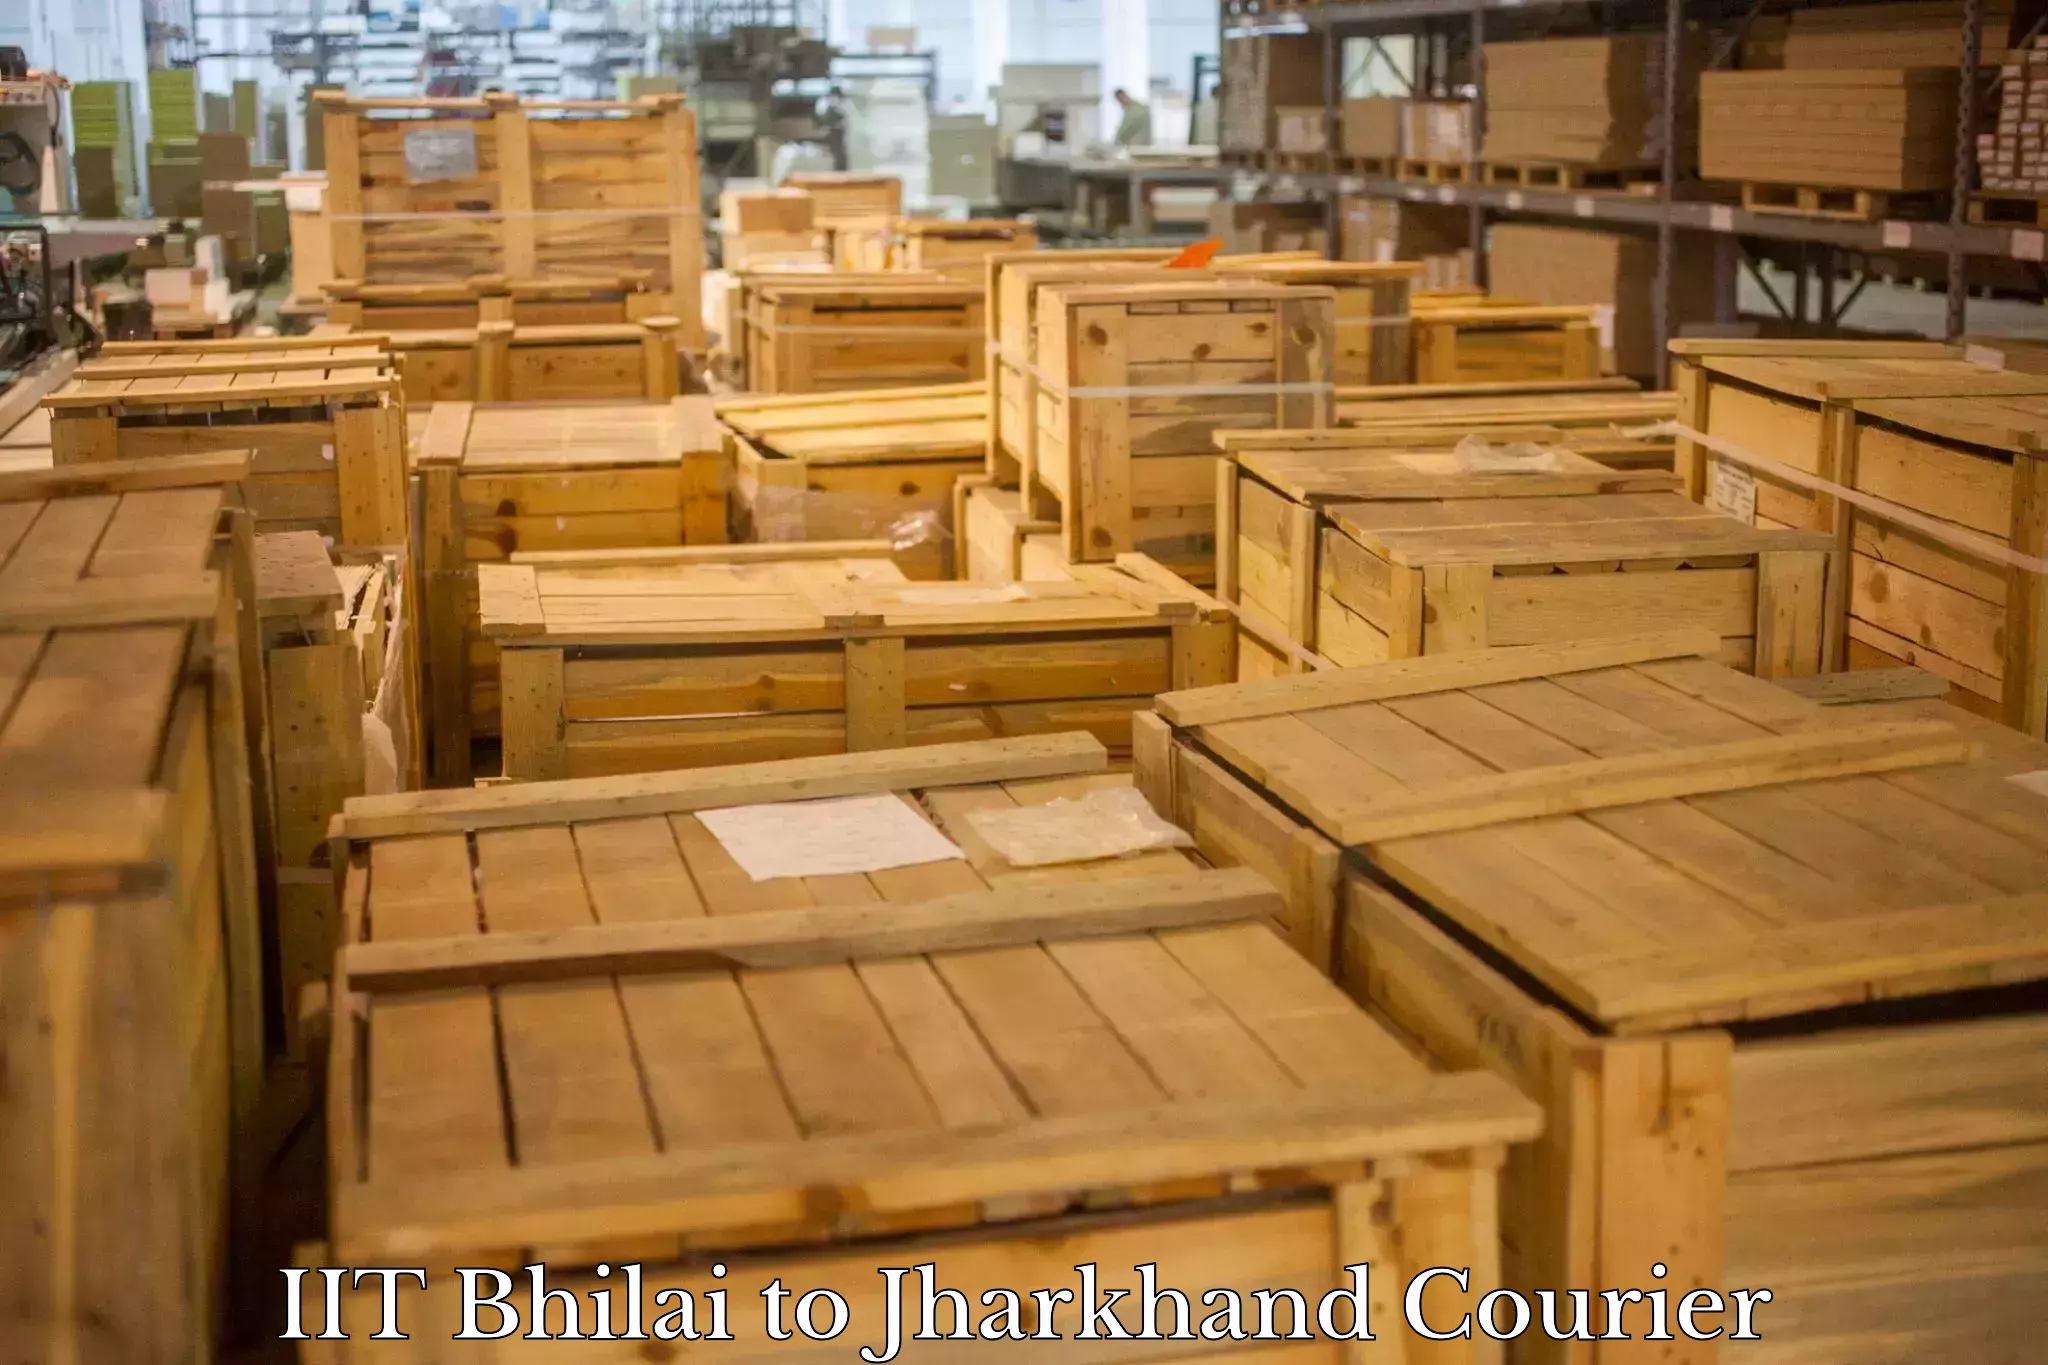 State-of-the-art courier technology IIT Bhilai to Jharkhand